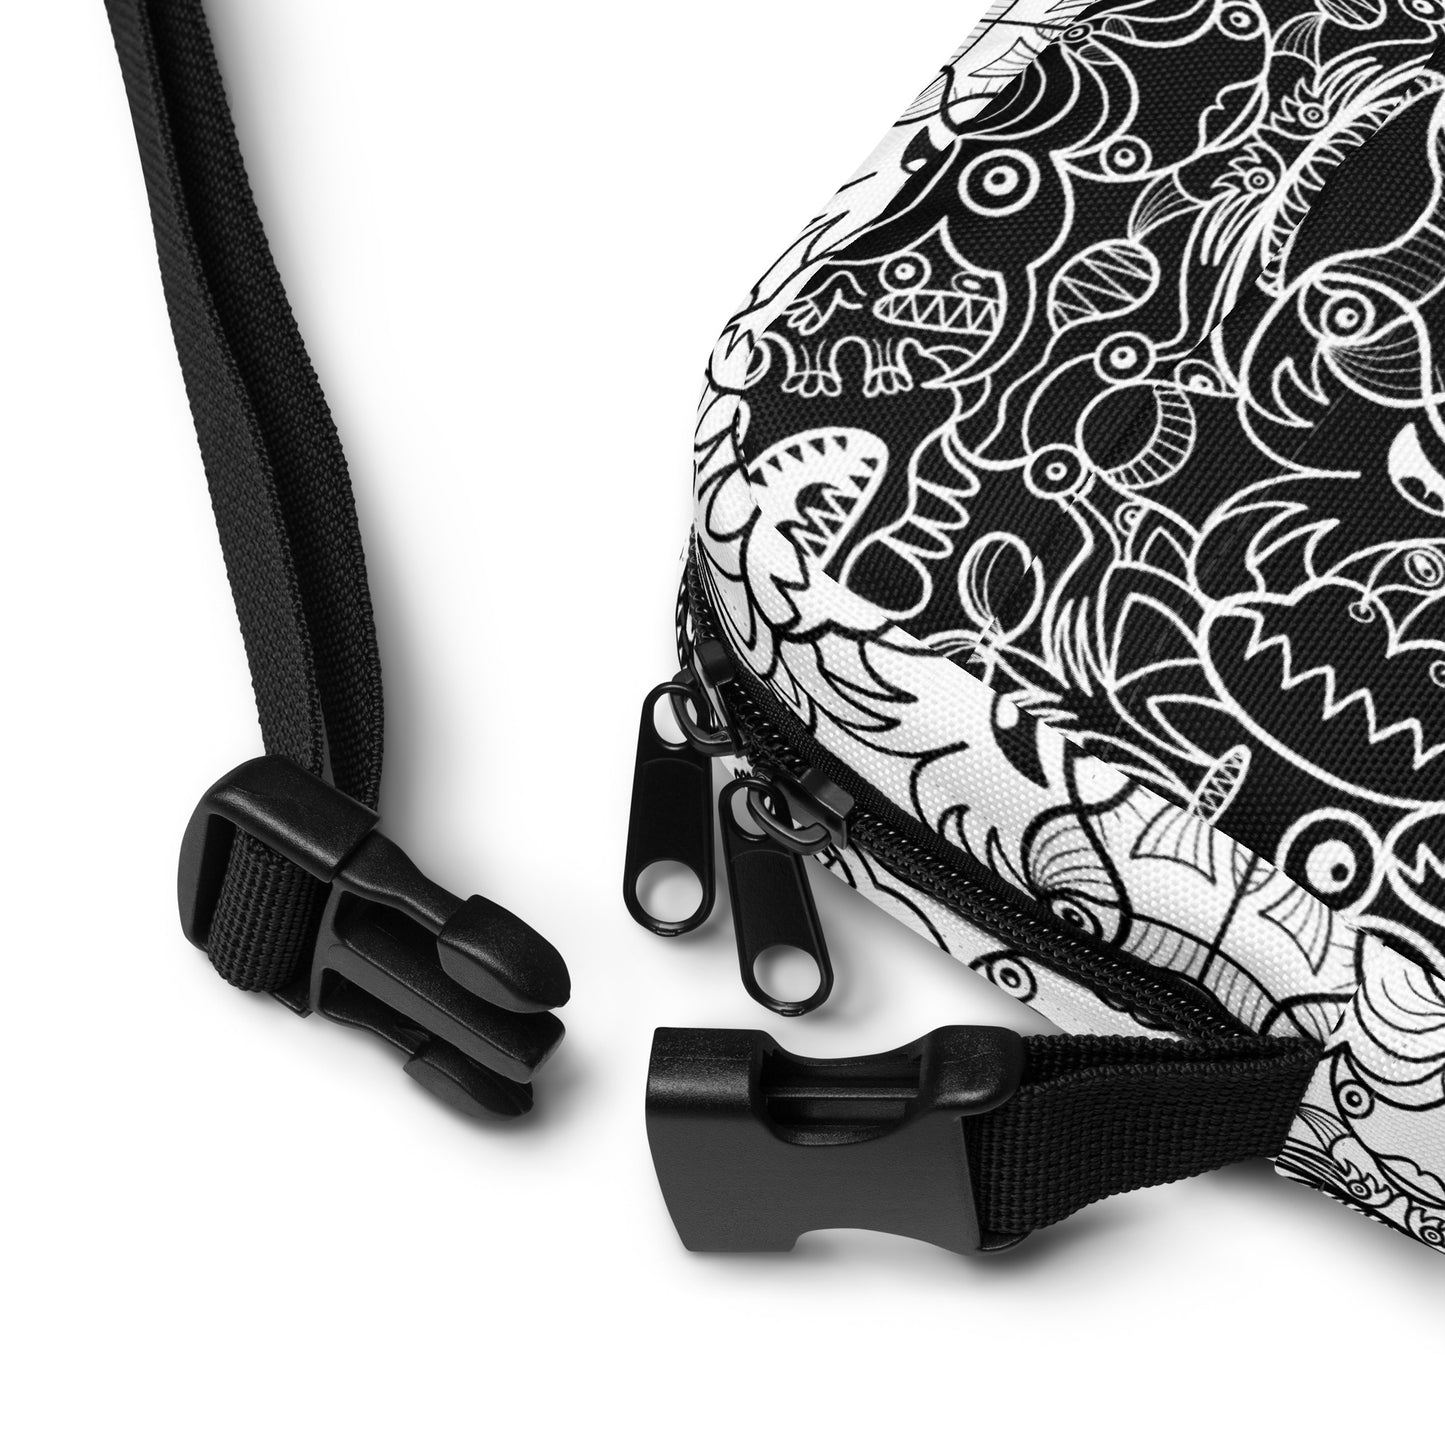 The powerful dark side of the Doodle world - Utility crossbody bag. Product details